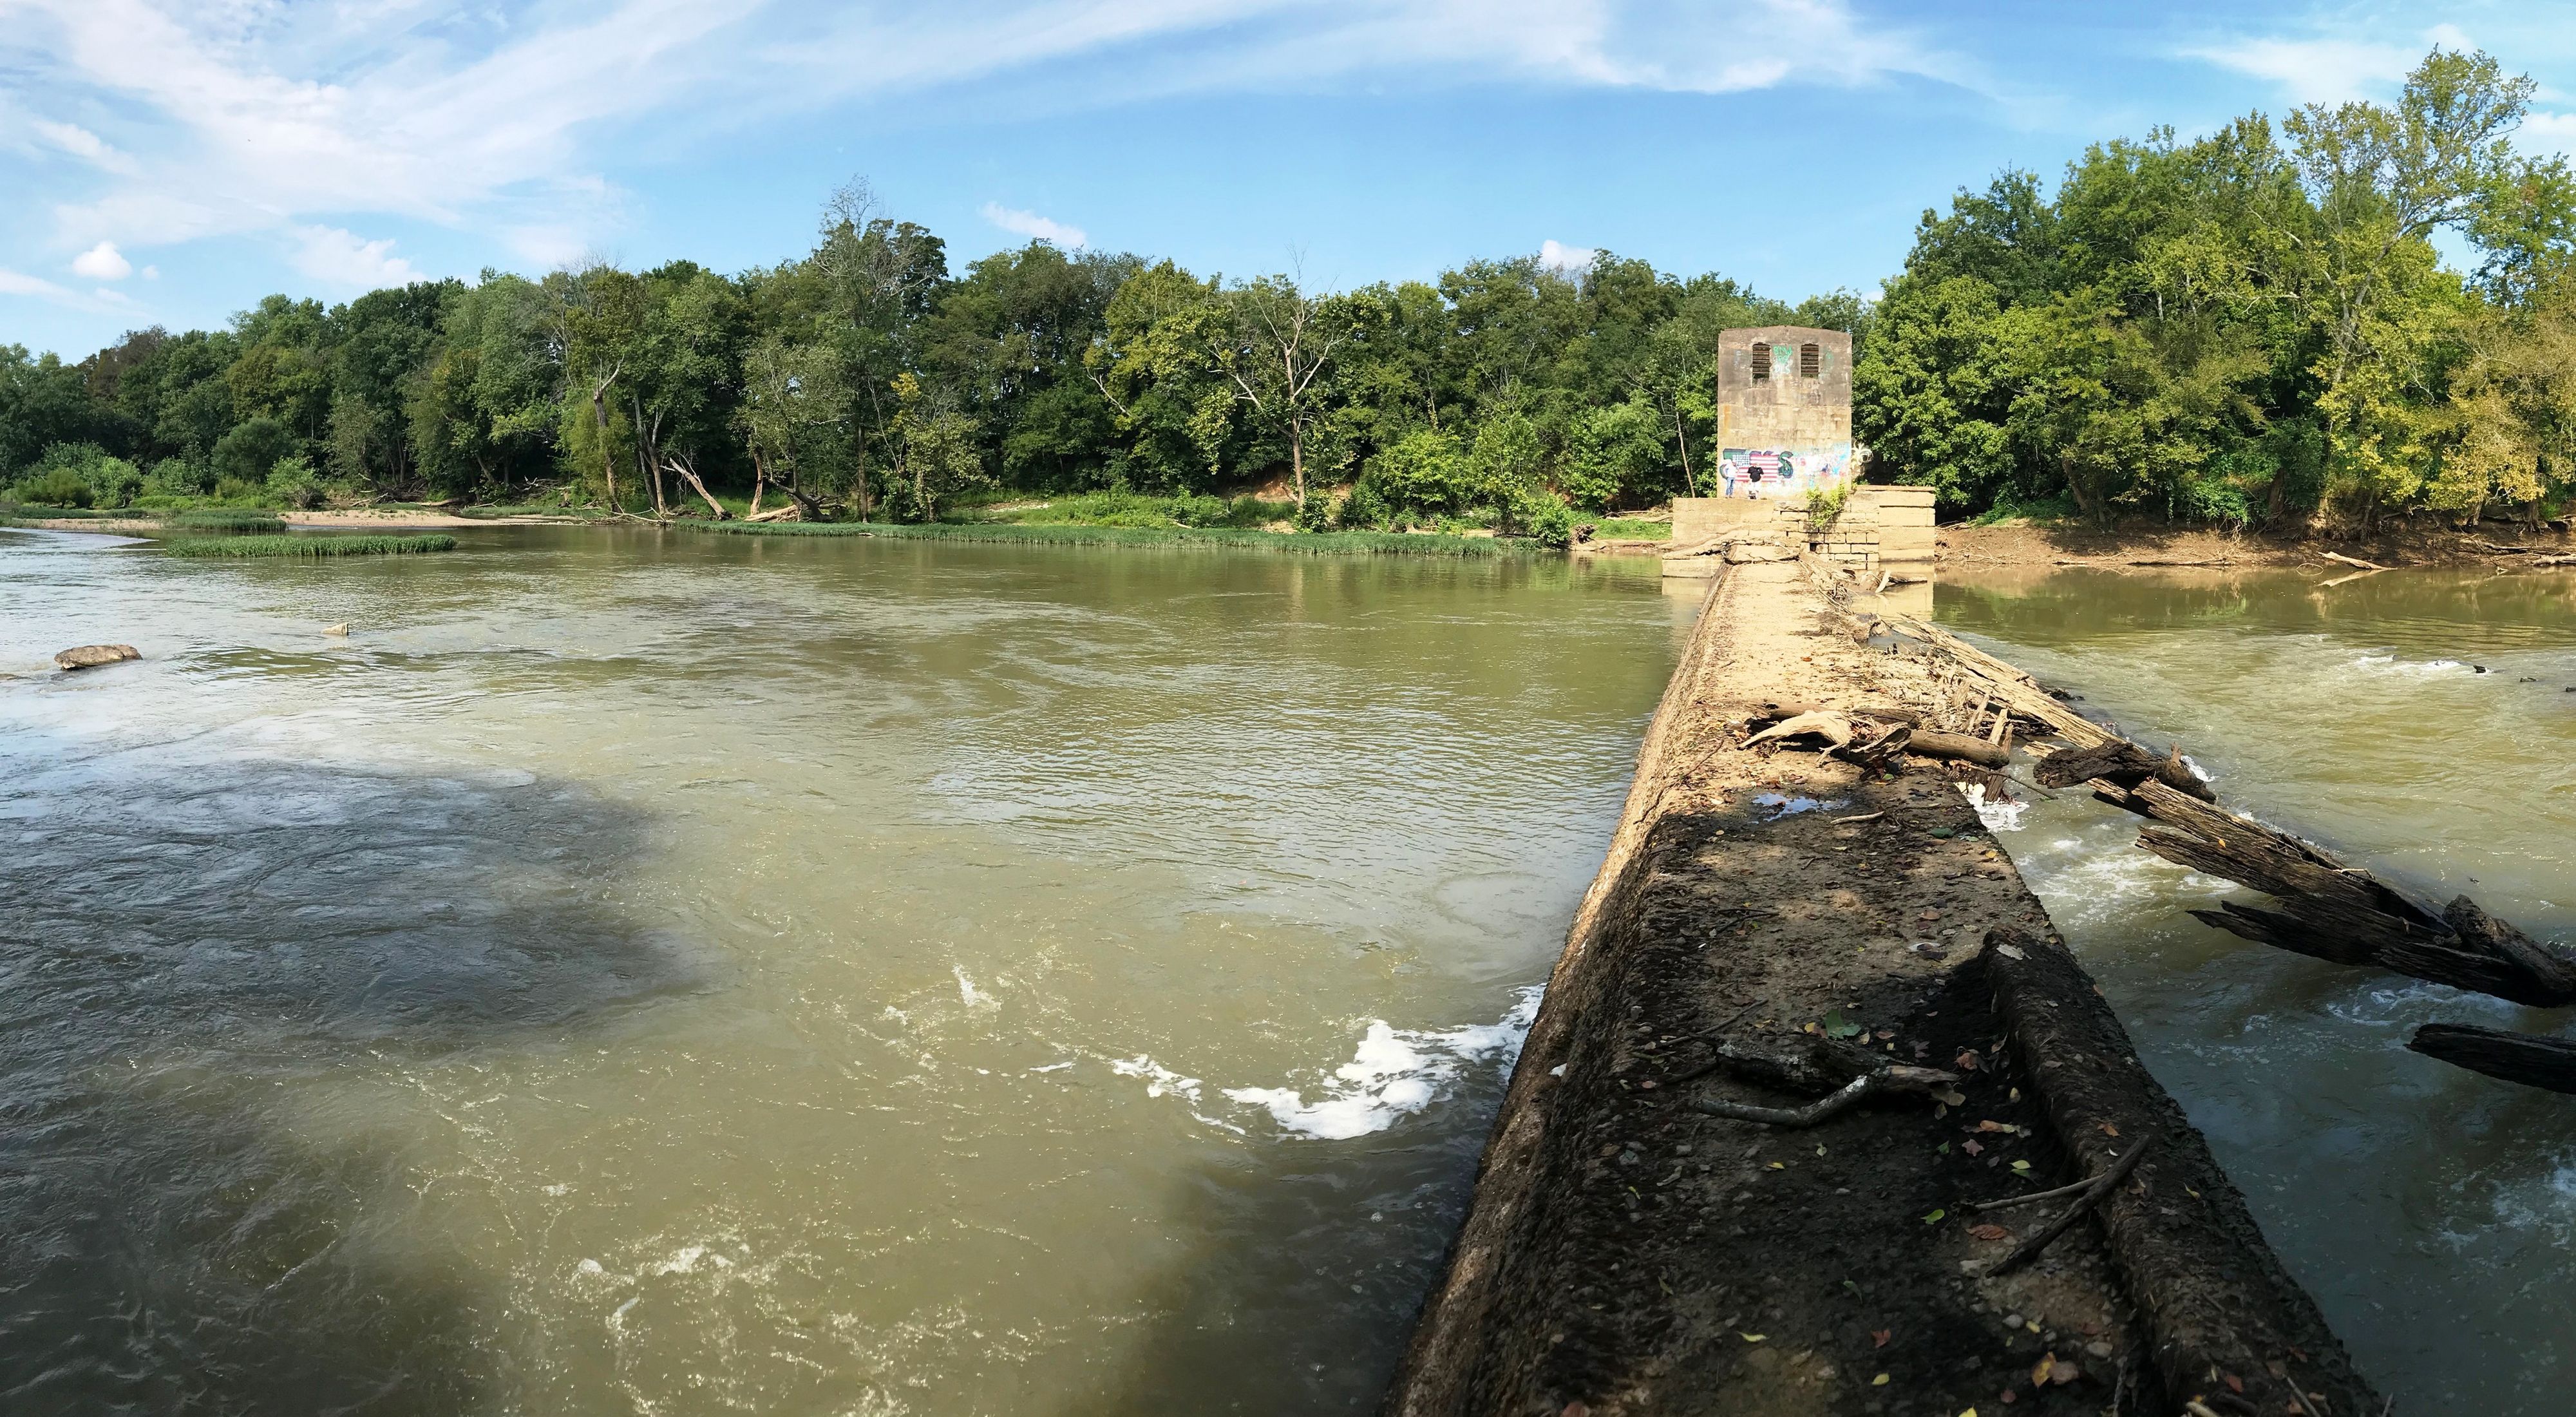 A low dam extends from the camera away across a muddy river, with driftwood piled up on the upstream side of the dam.